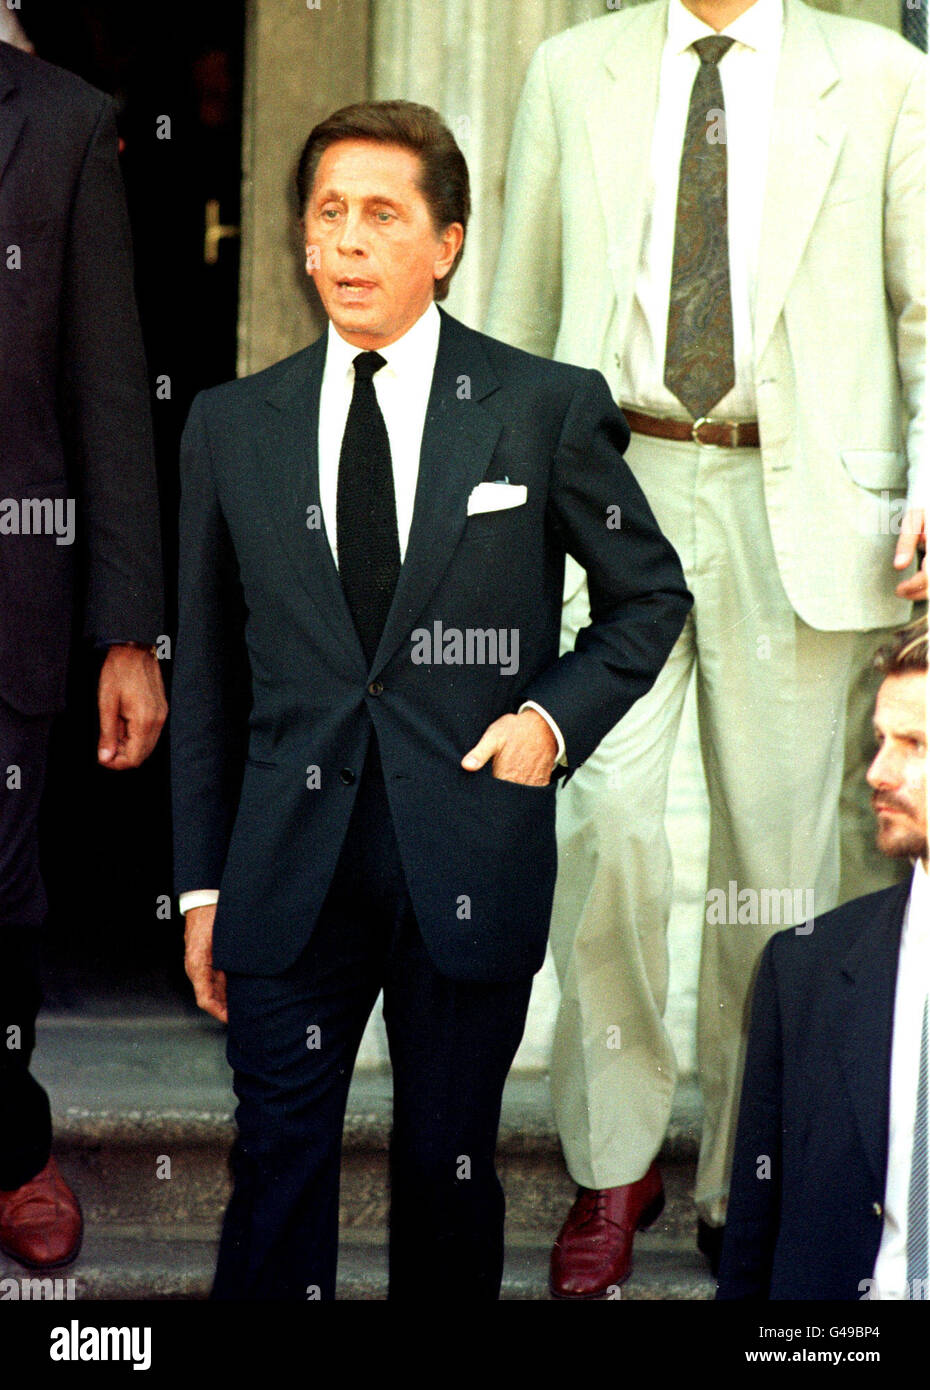 Valentino attends the memorial service of murdered fashion designer Gianni Versace, who was shot in the head outside his Florida home. The service was held in Milan, Italy. Stock Photo